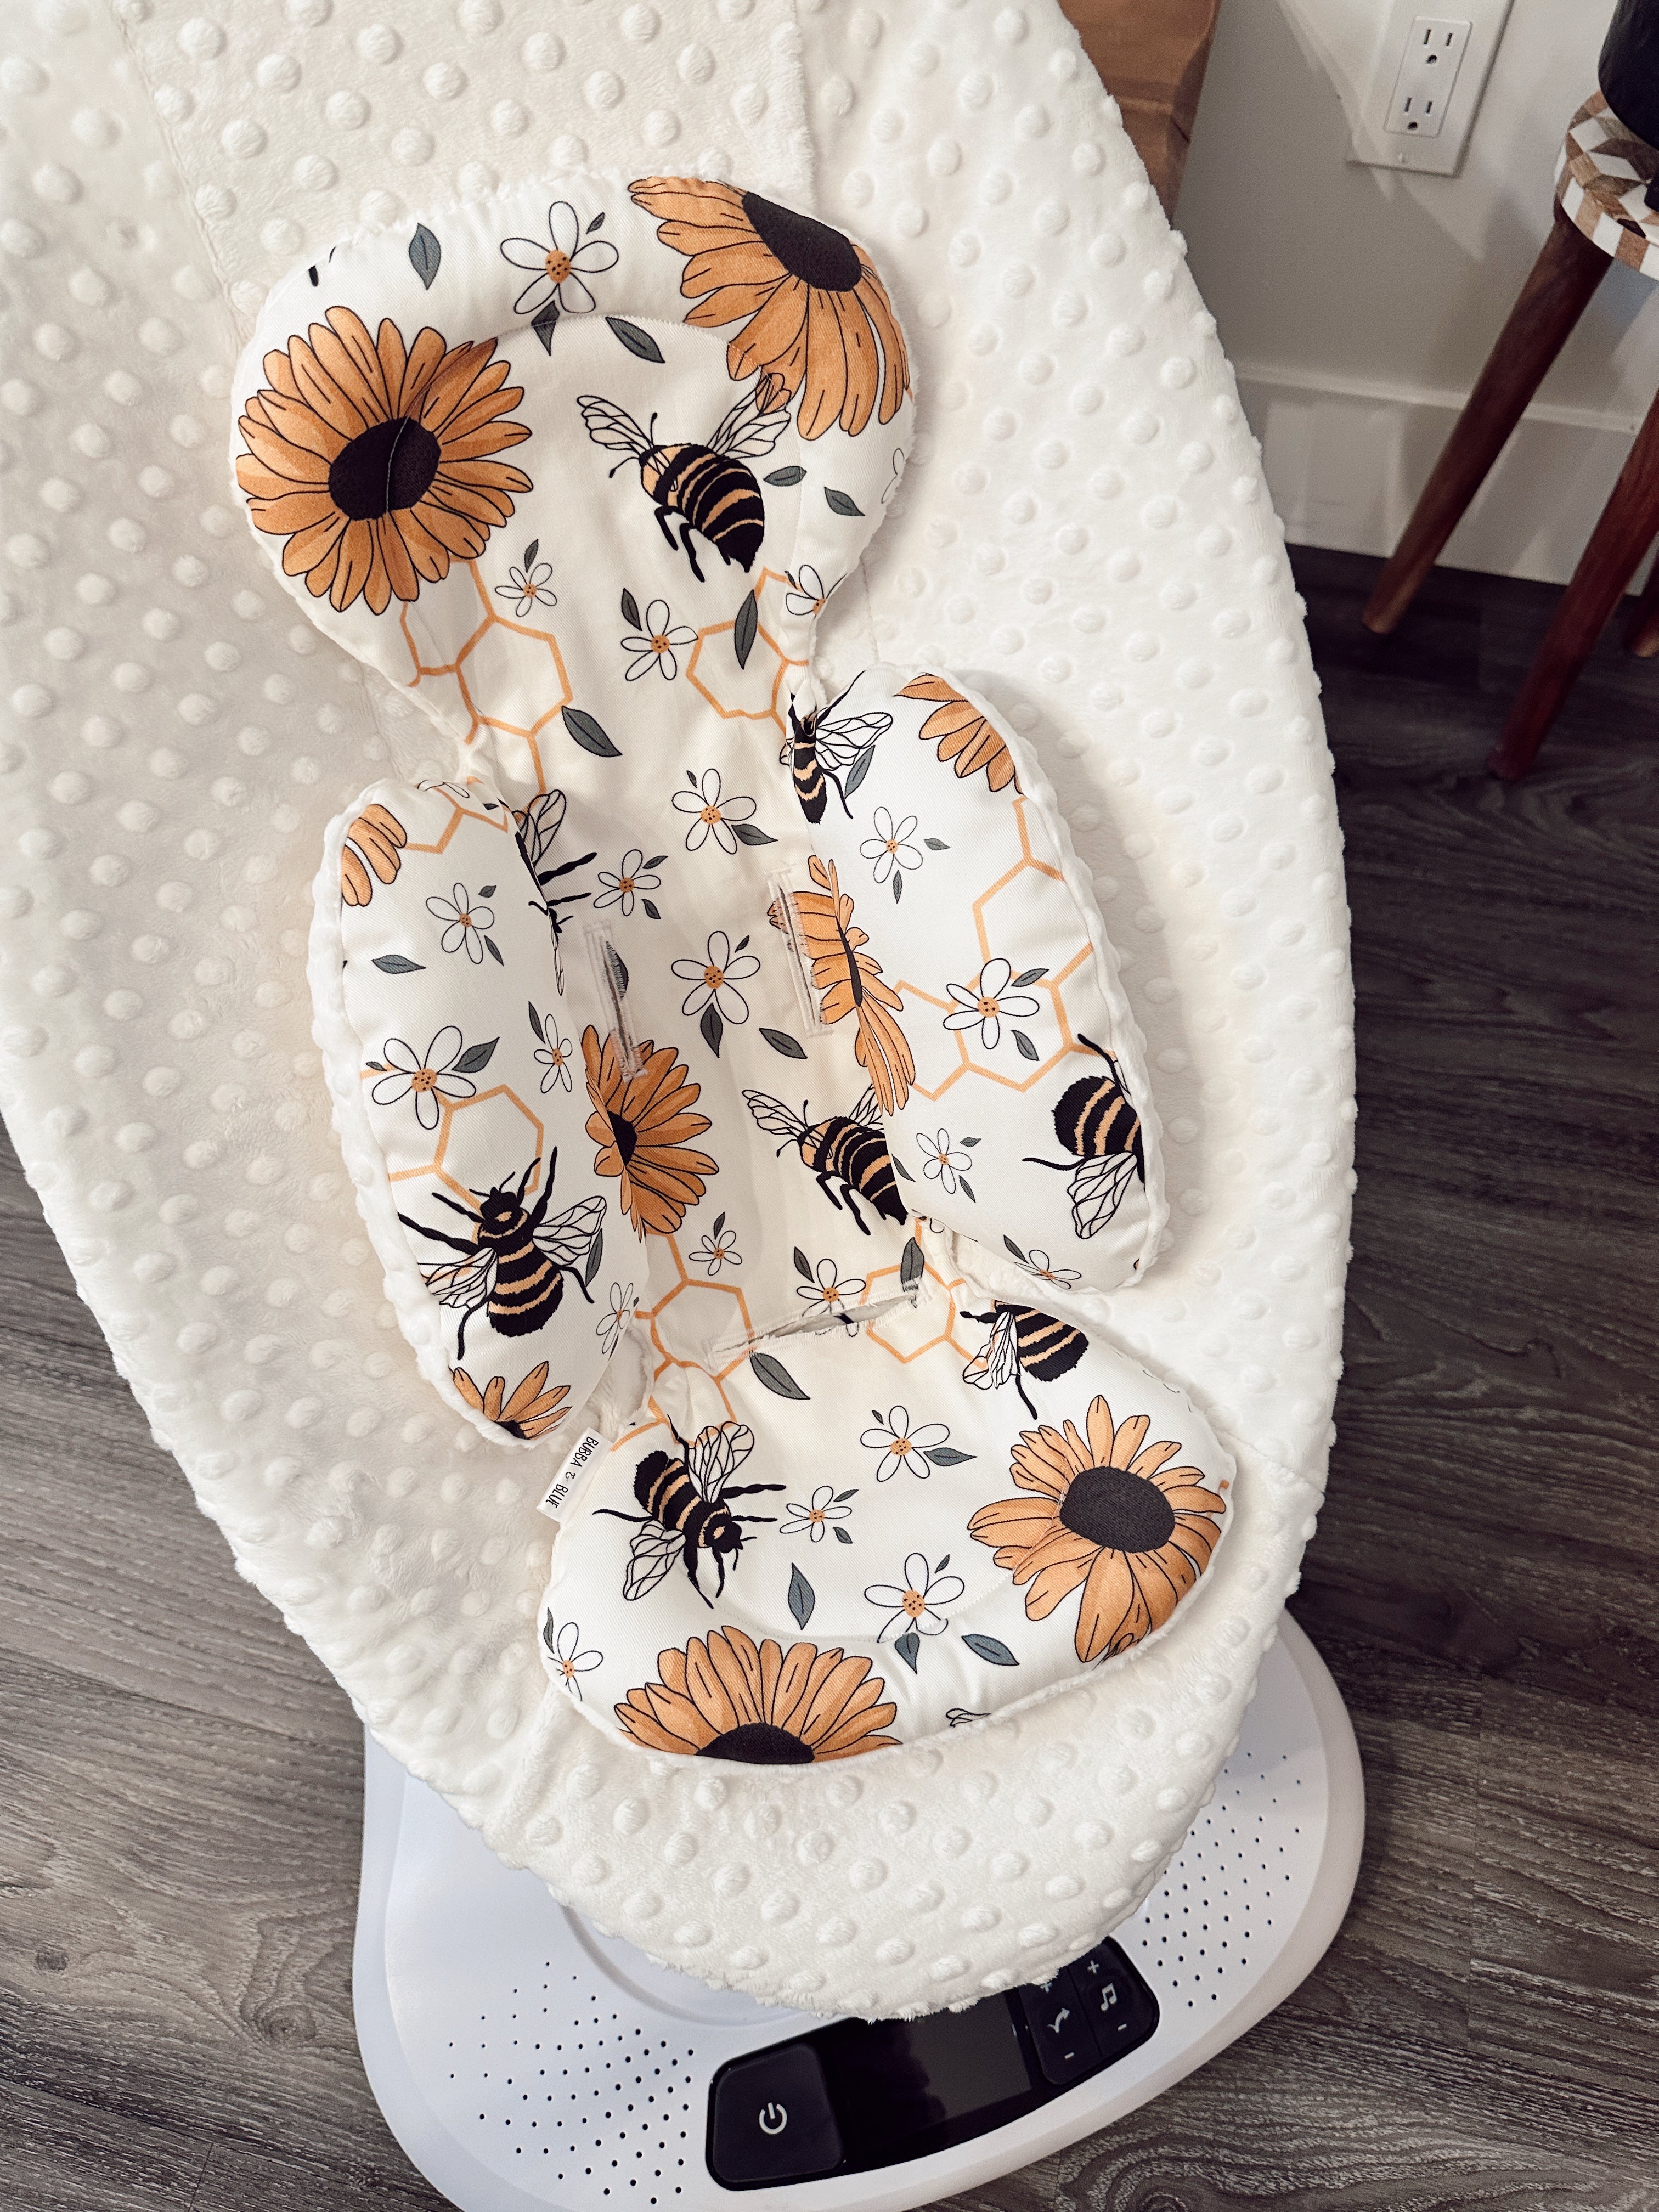 Mamaroo seat cover, newborn insert and balls in save the bees